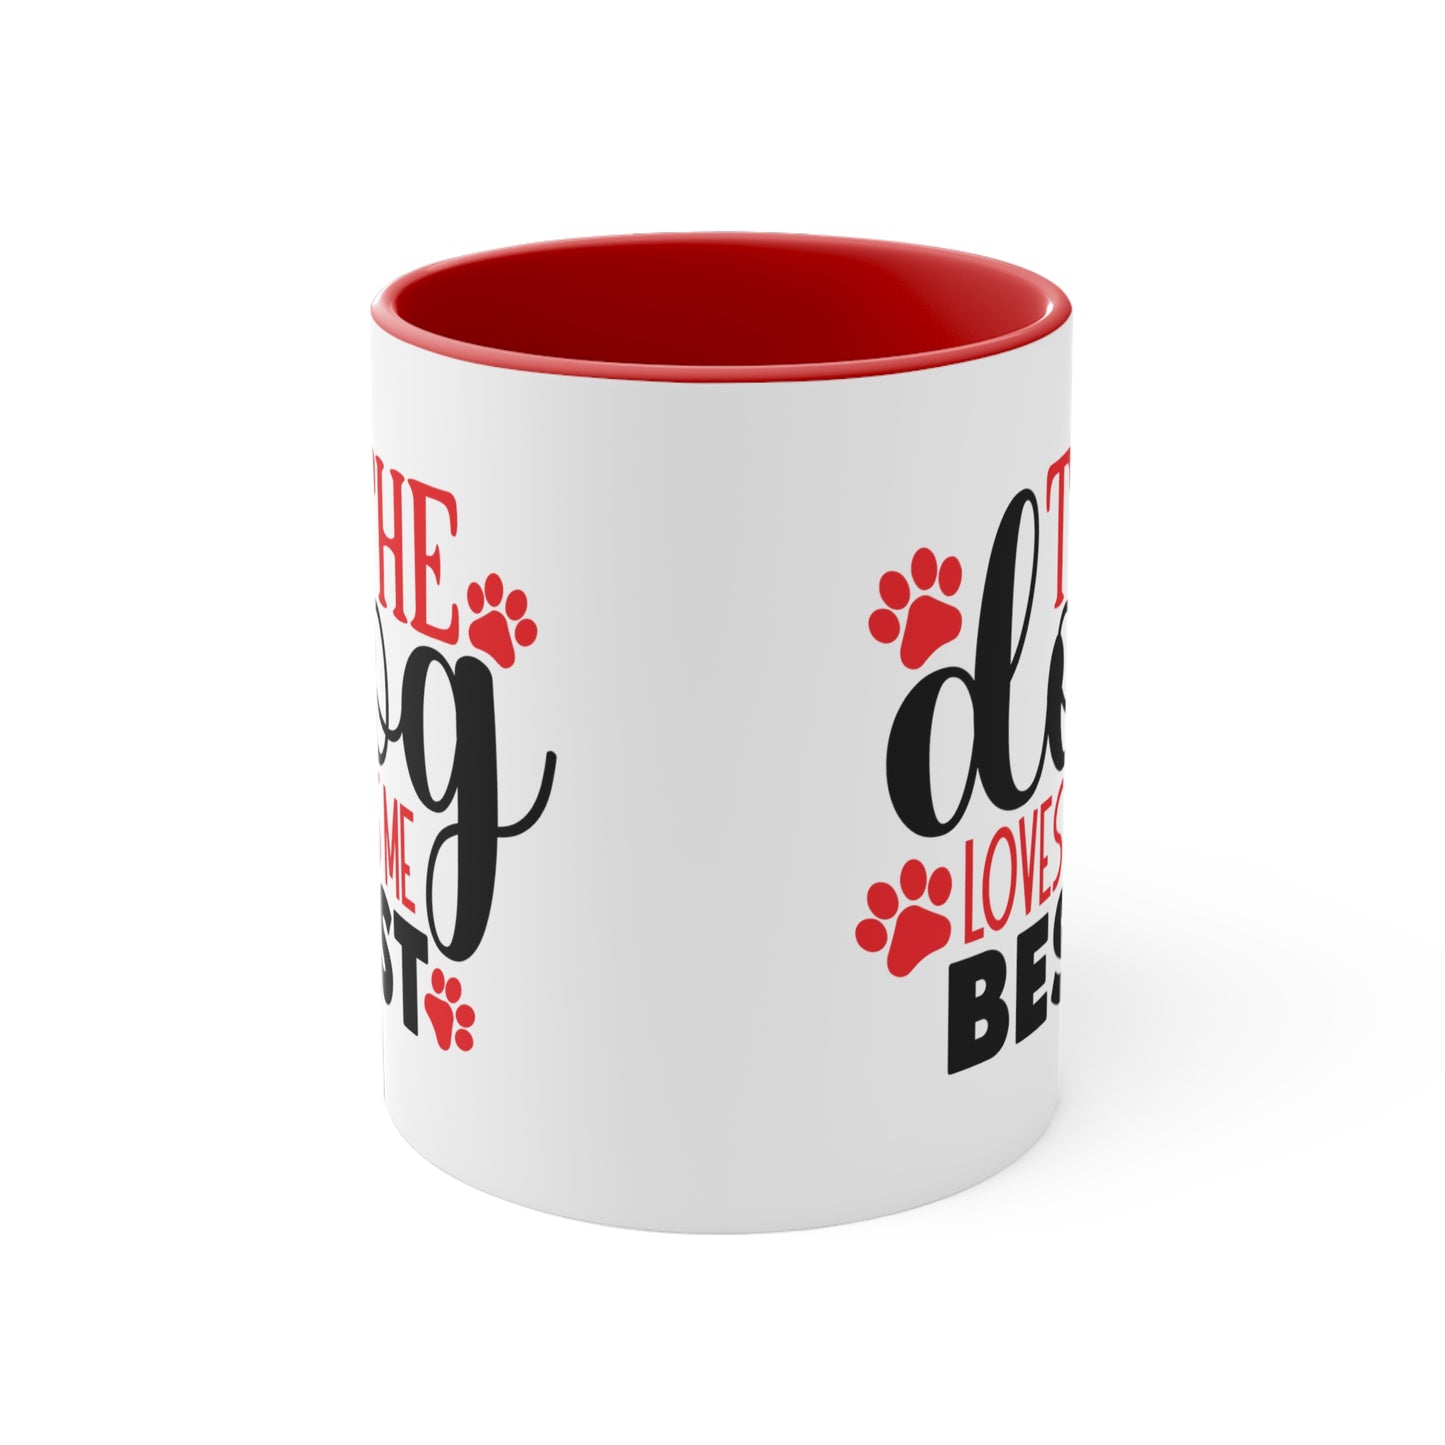 The Dog Love Me Best Valentines Day Accent Coffee Mug, 11oz